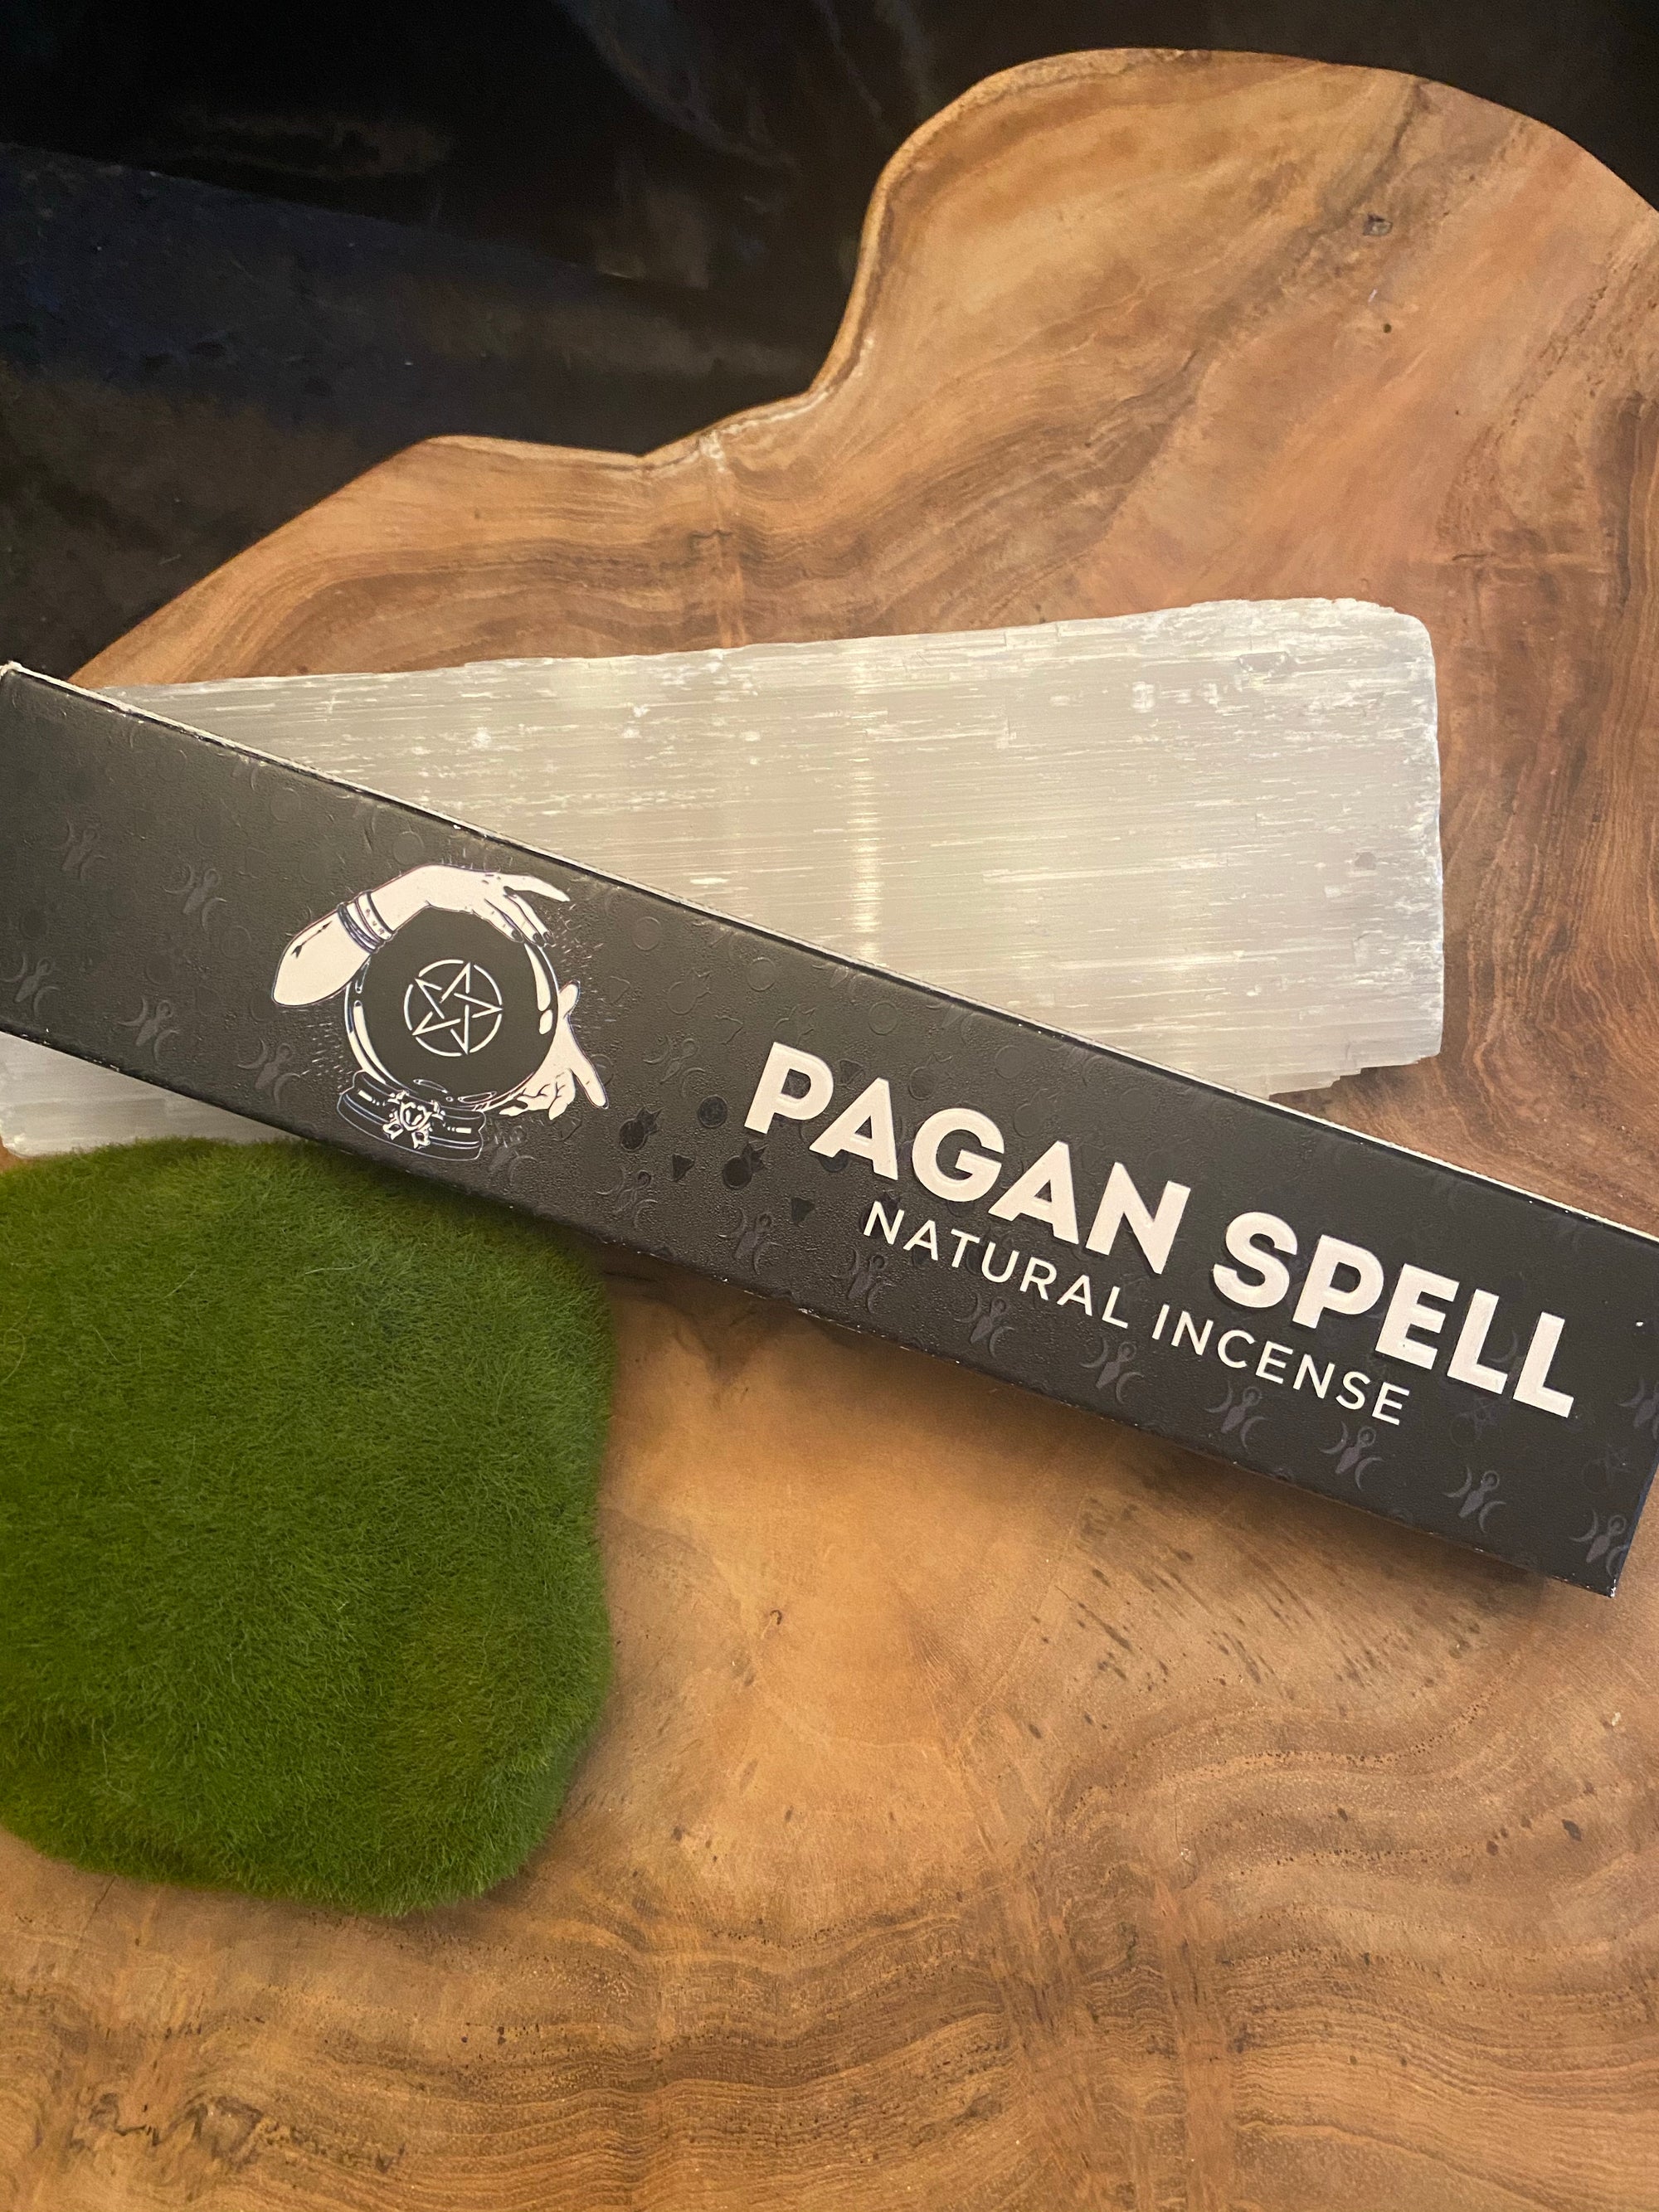 Pagan Spell Incense 15g - The Spirit of Life